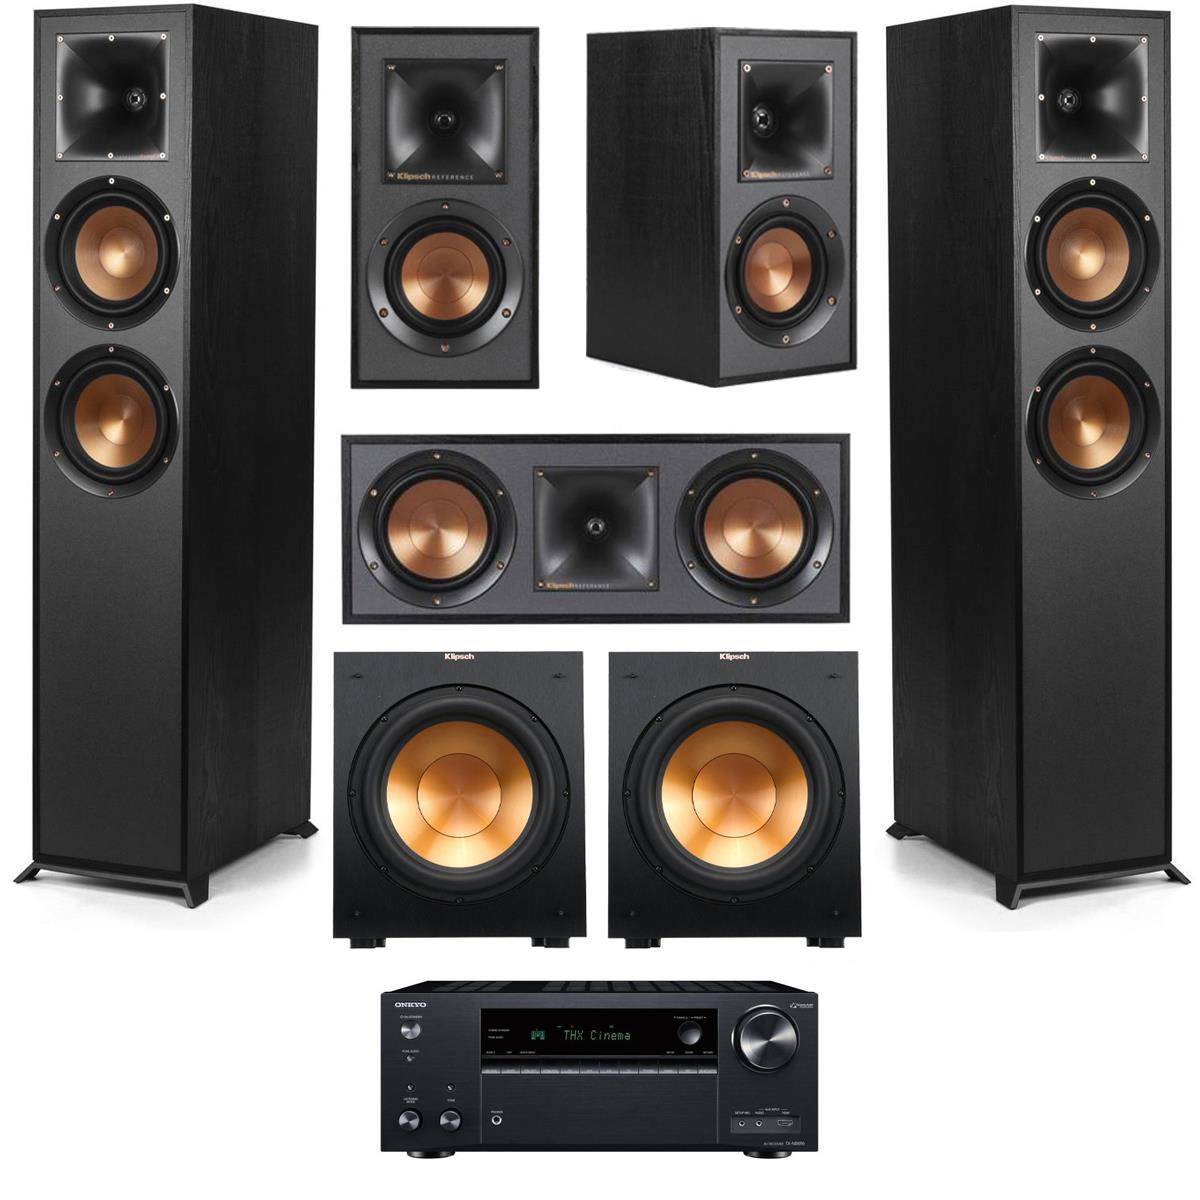 

Klipsch Reference 5.2 Home Theater System, Black w/ Denon AVR-S970H 7.2 Receiver